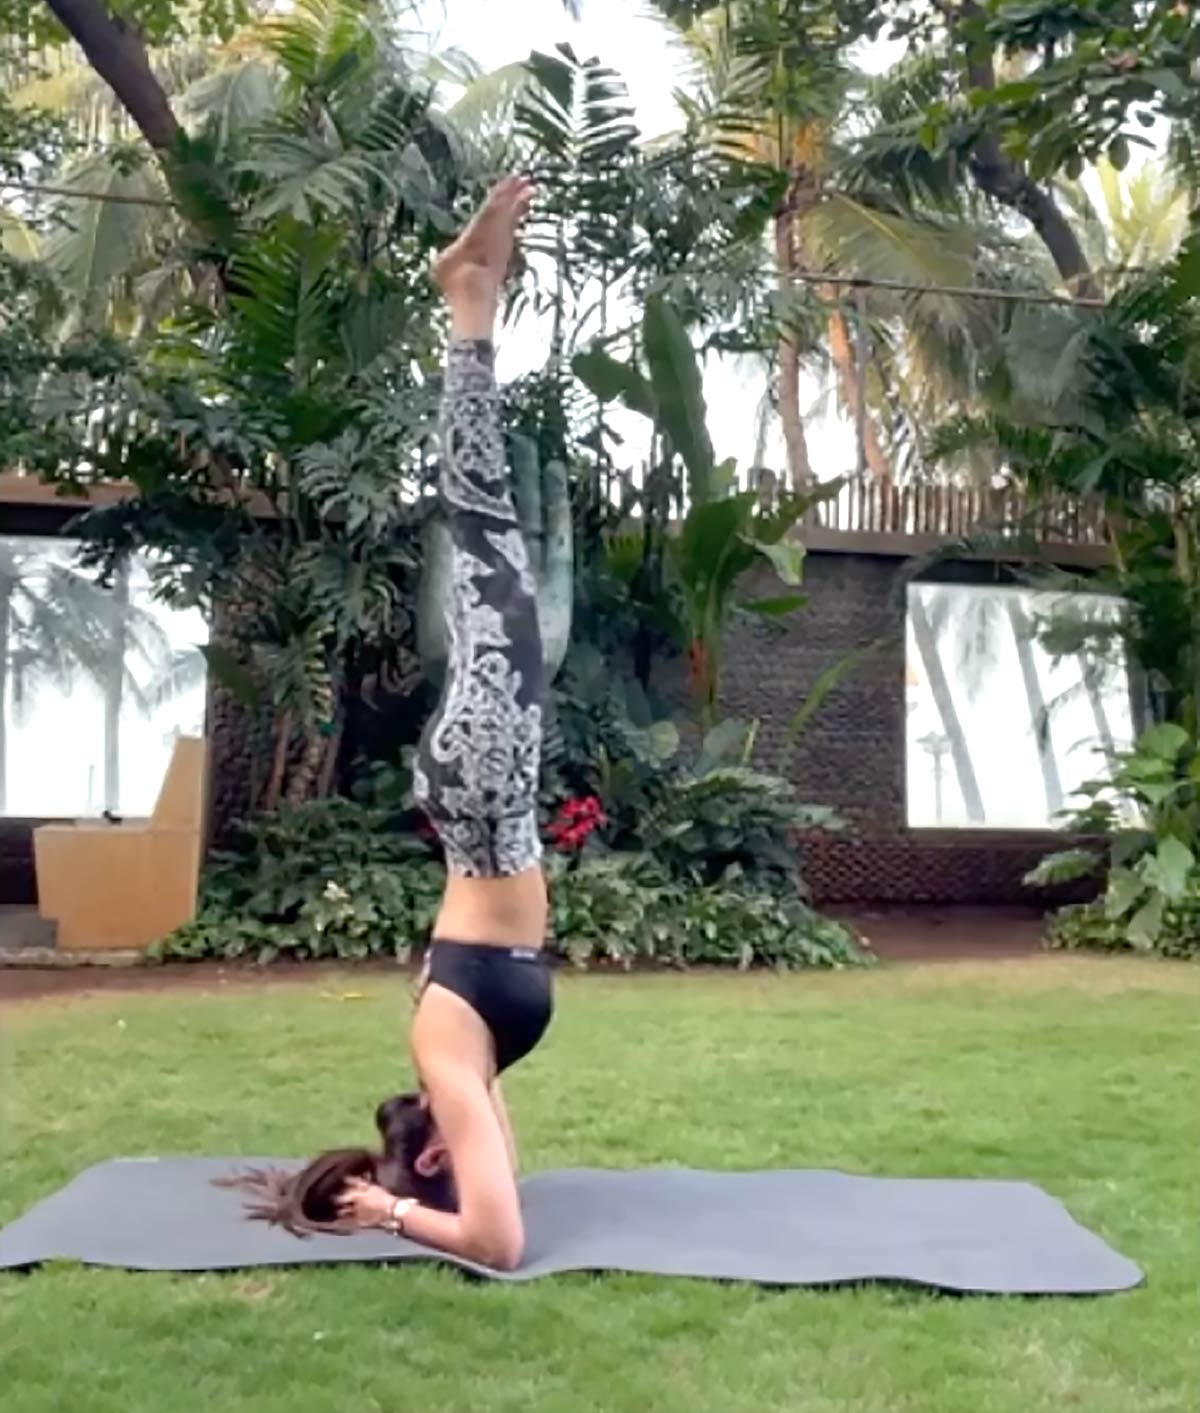 Yoga Day 2022: These Actresses Look Fit, Young Even Over 40! - Woman's era